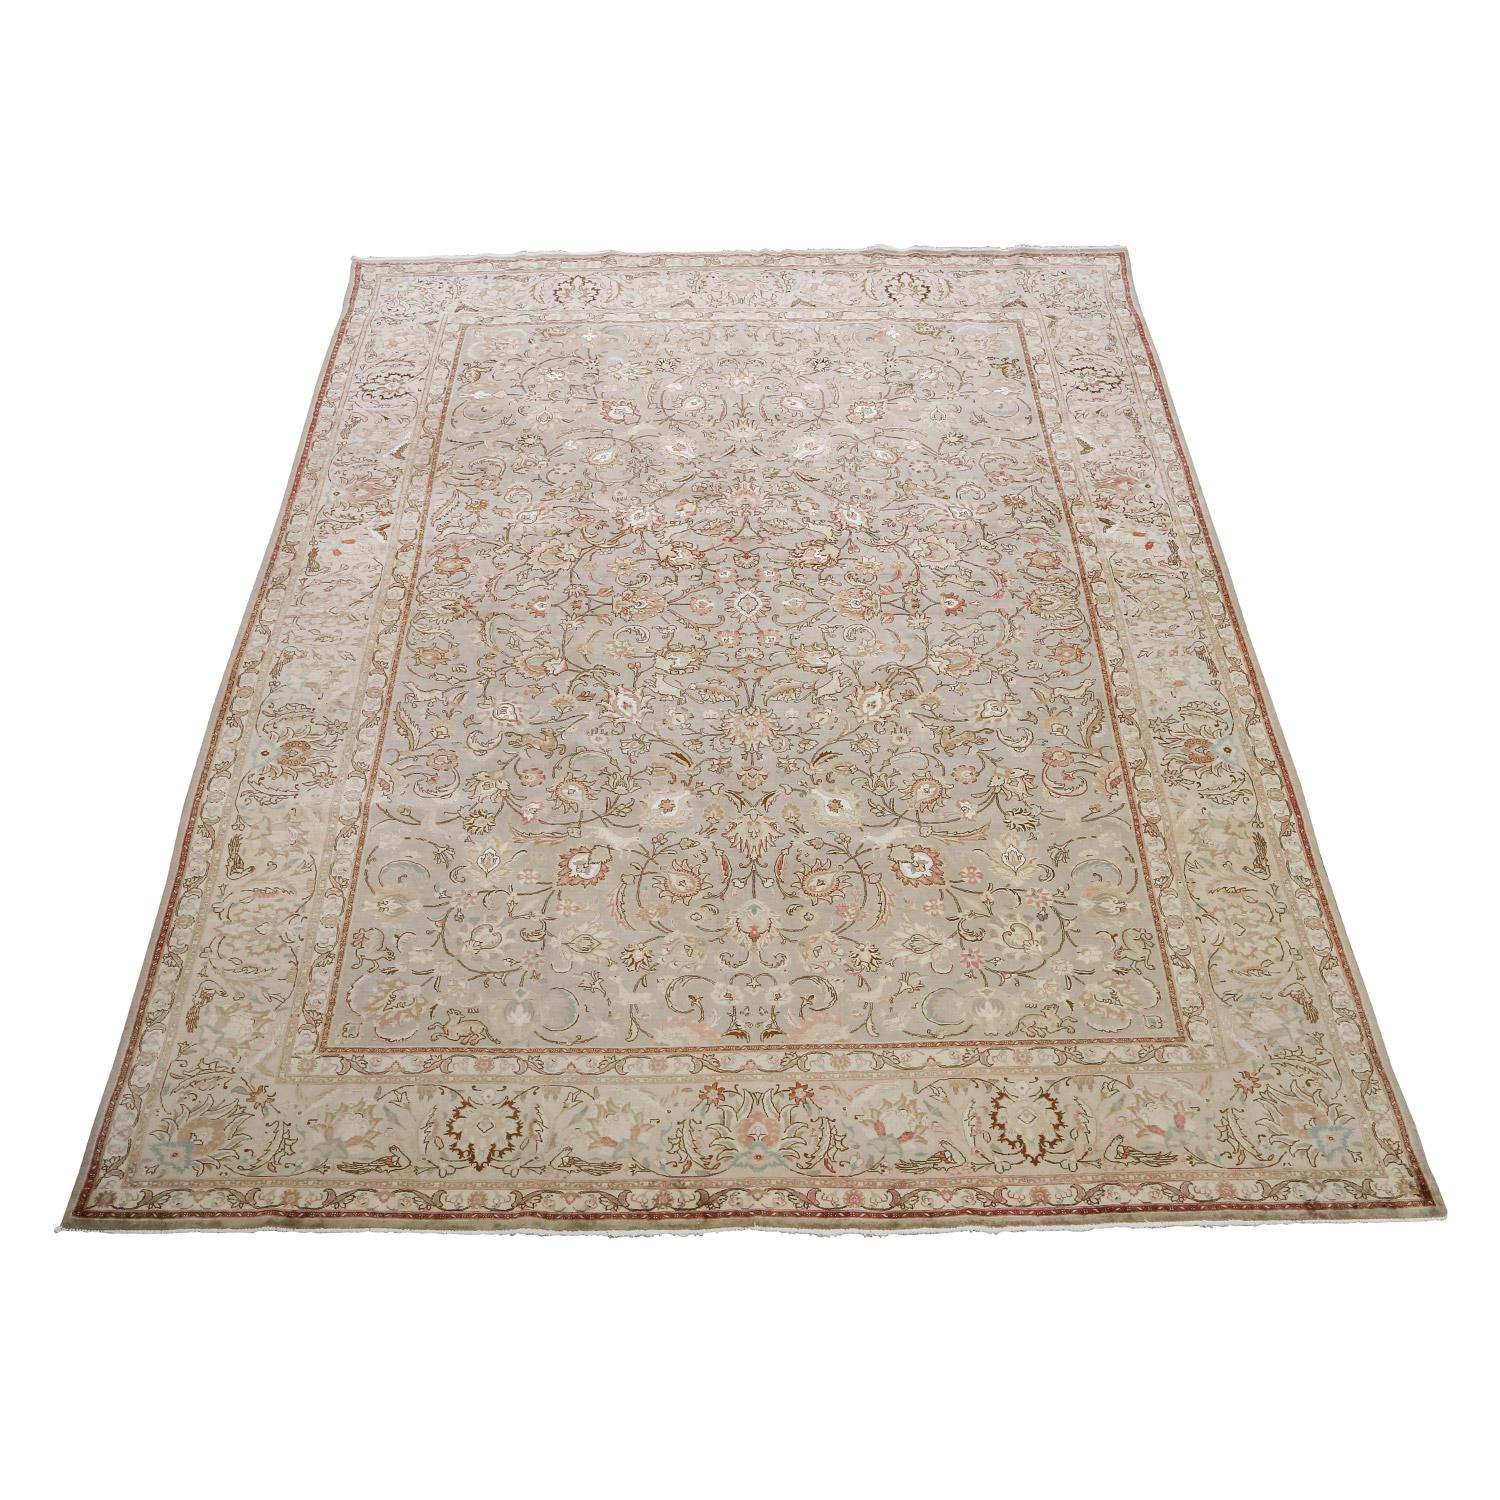 This vintage Tabriz rug exudes timeless sophistication with its elegant all-over design and a palette of neutral colors. The harmonious blend of soft tones, including ivory, beige, and subtle grays, creates a sense of tranquility and versatility